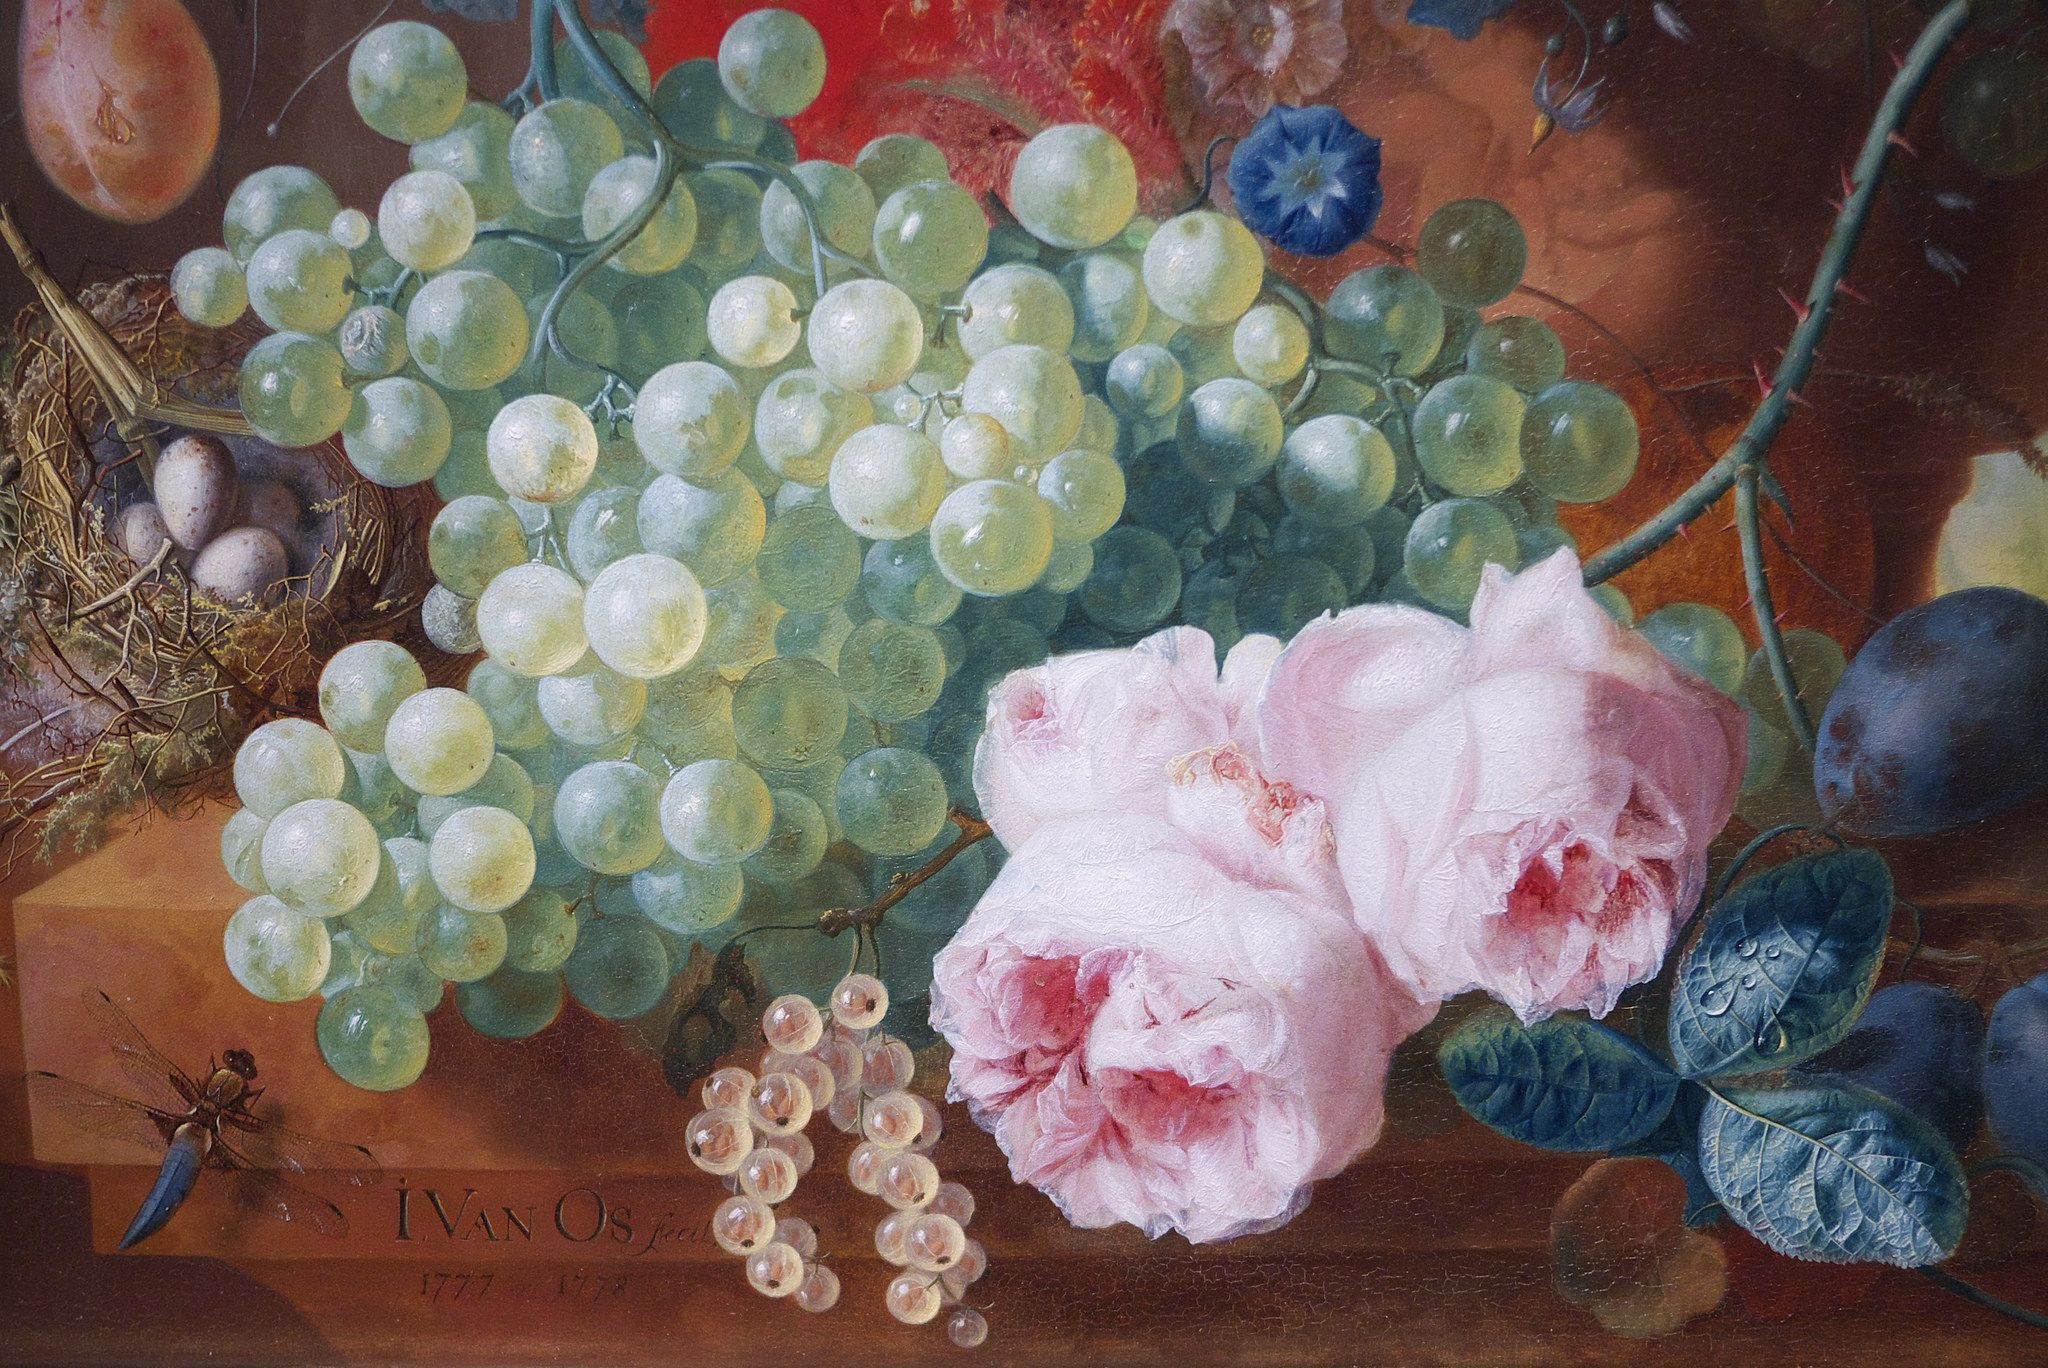 22 Recommended 36 Inch Vase 2024 free download 36 inch vase of fruit flowers in a terracotta vase detail by jan van os 1777 8 intended for fruit flowers in a terracotta vase detail by jan van os 1777 8 national gallery london detail